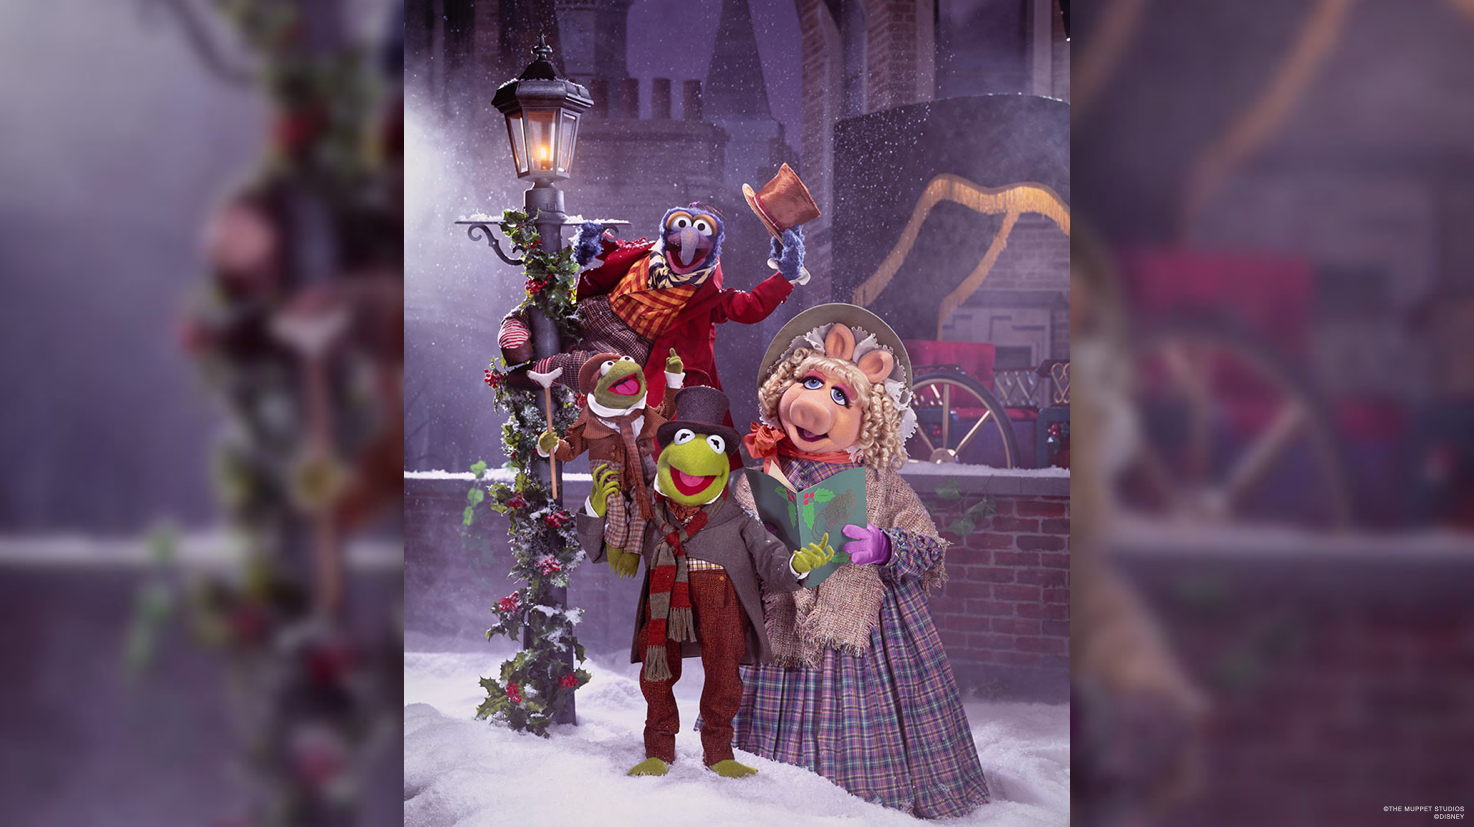 Join the Muppets as they ring in 30 years of Holiday Cheer, celebrating The Muppet Christmas Carol!